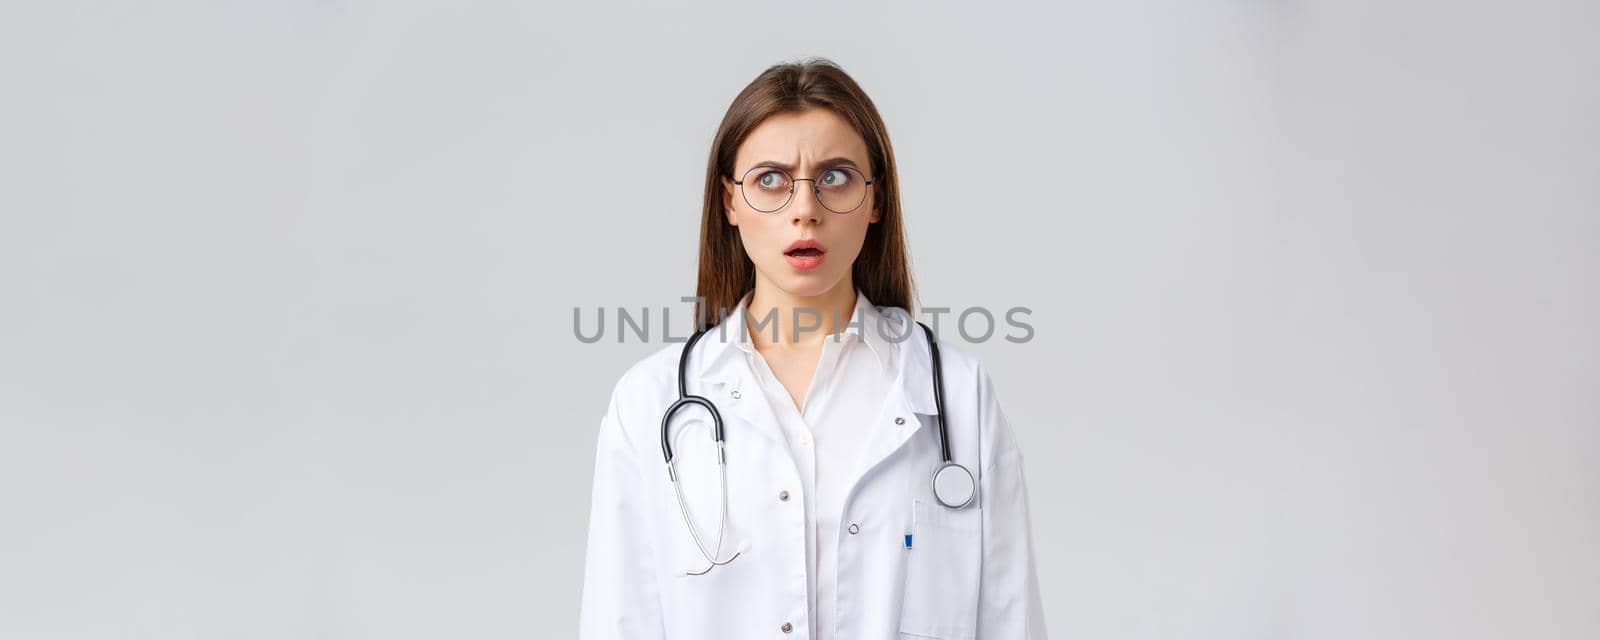 Healthcare workers, medicine, insurance and covid-19 pandemic concept. Shocked and confused young female doctor in white scrubs and glasses, stethoscope, stare left with concerned nervous face.